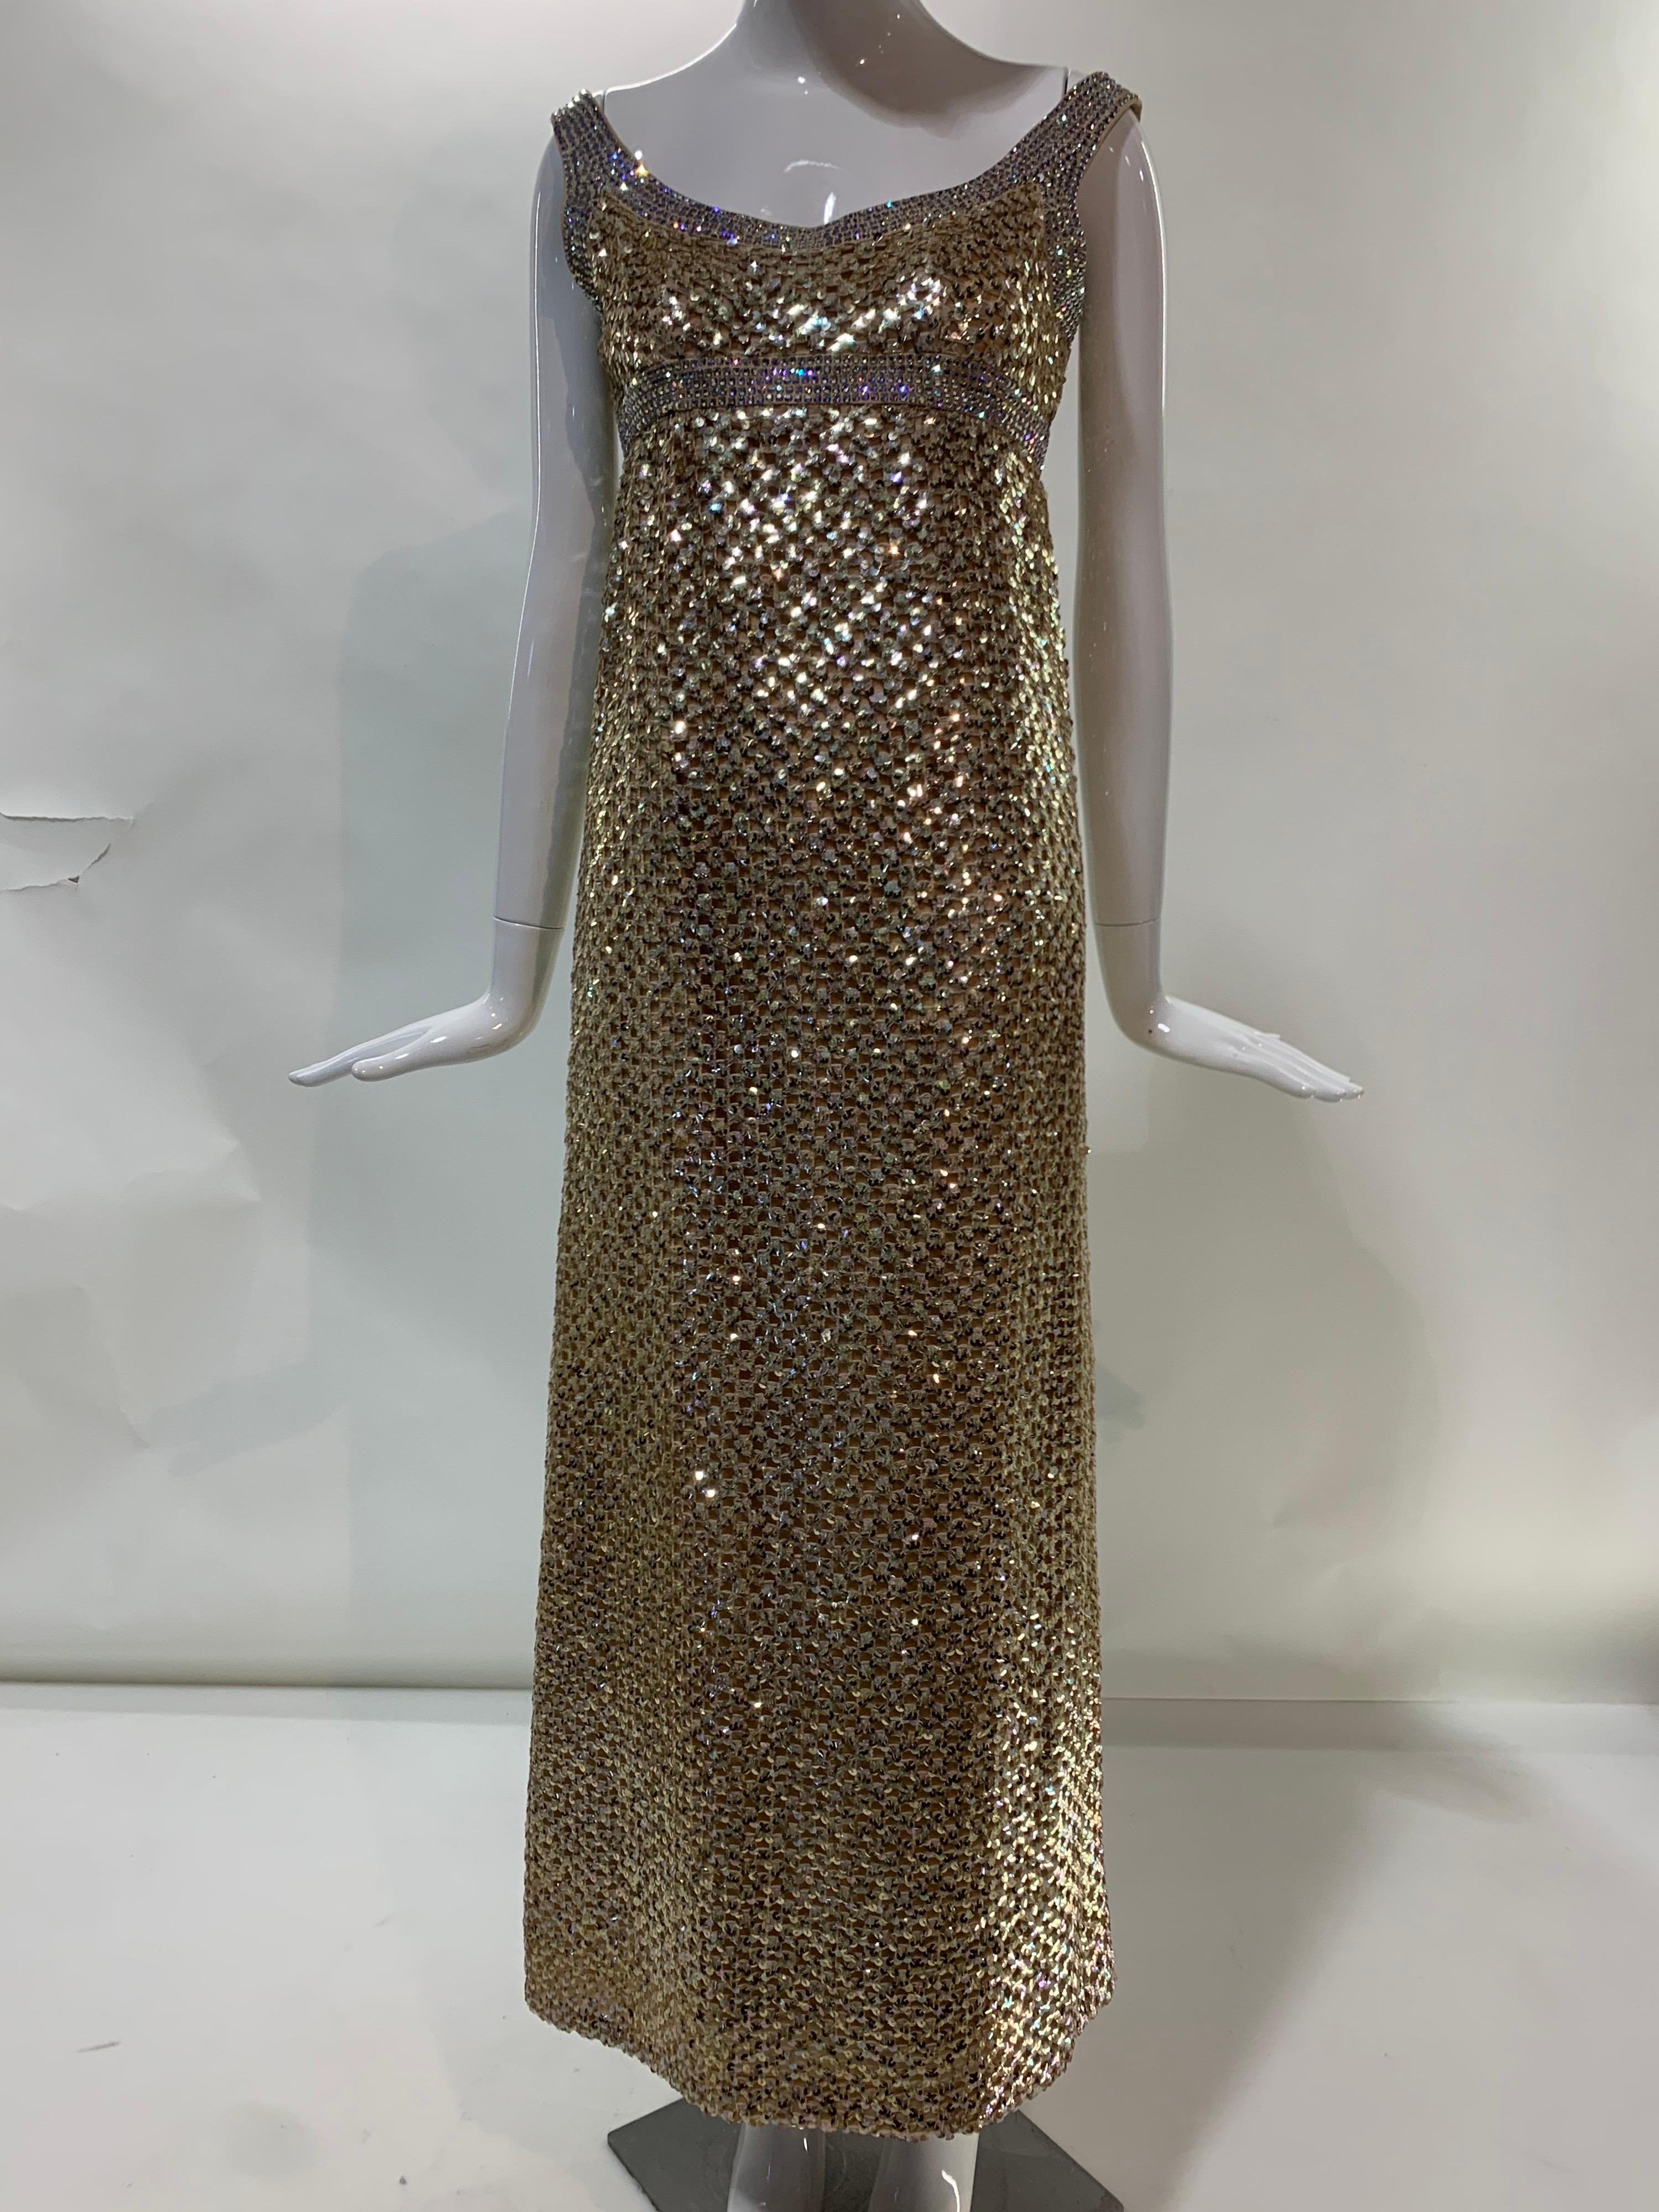 1960s Mod Empire Waist Gown in Gold Sequin Lattice and Iridescent Rhinestones For Sale 9